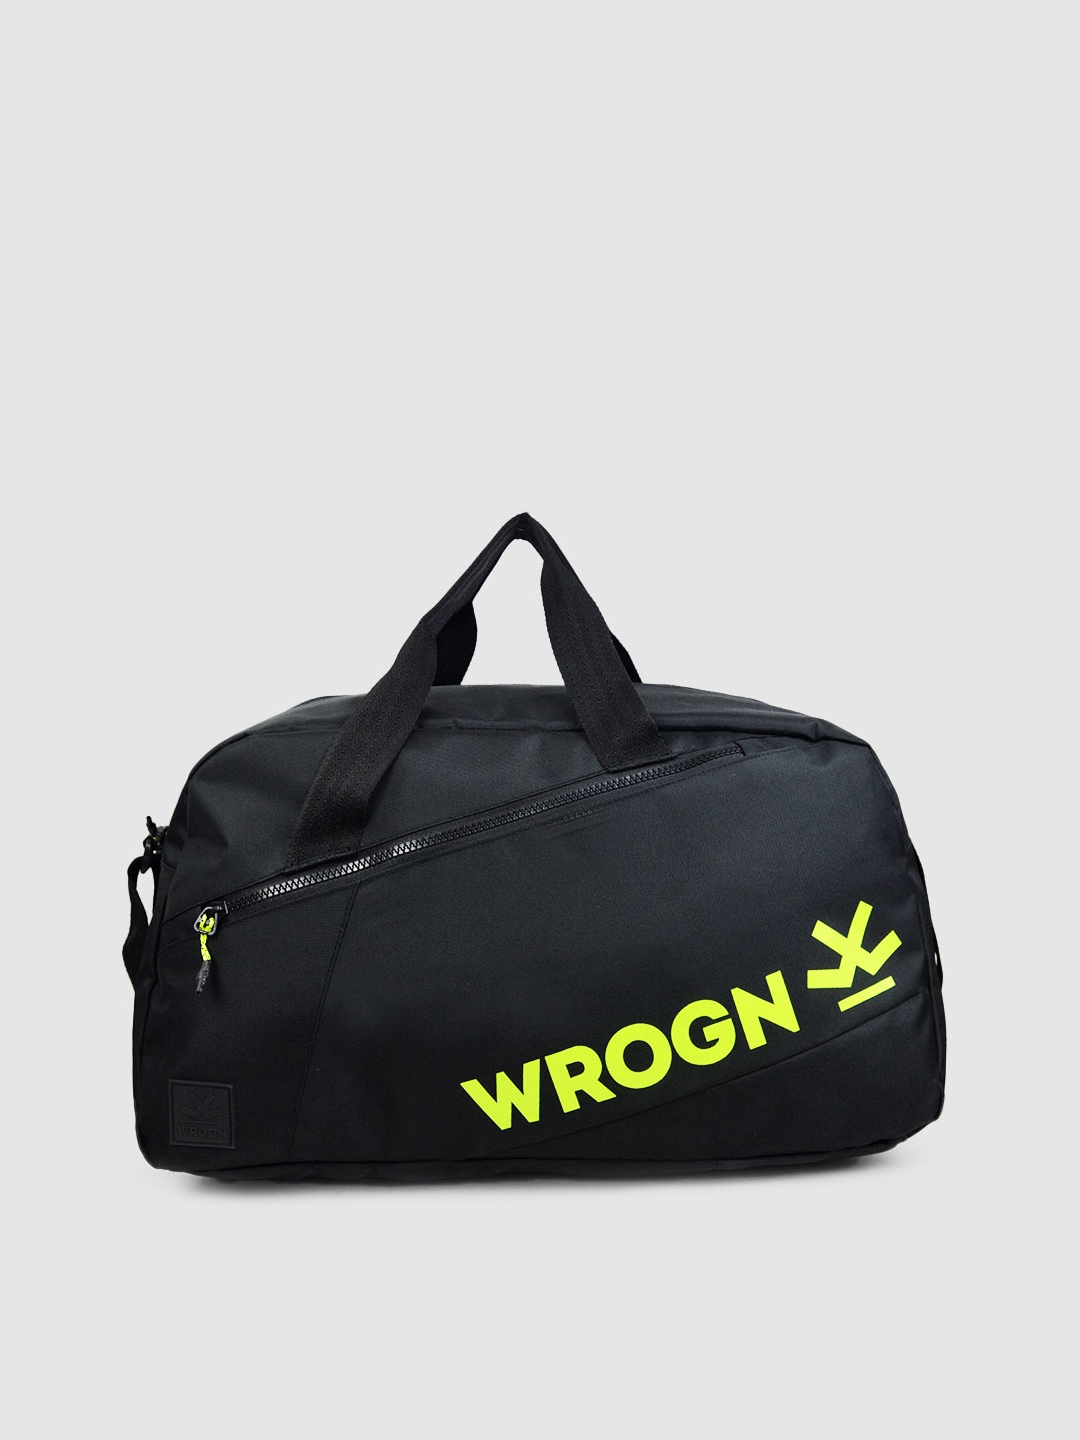 Share more than 140 wrogn bags latest